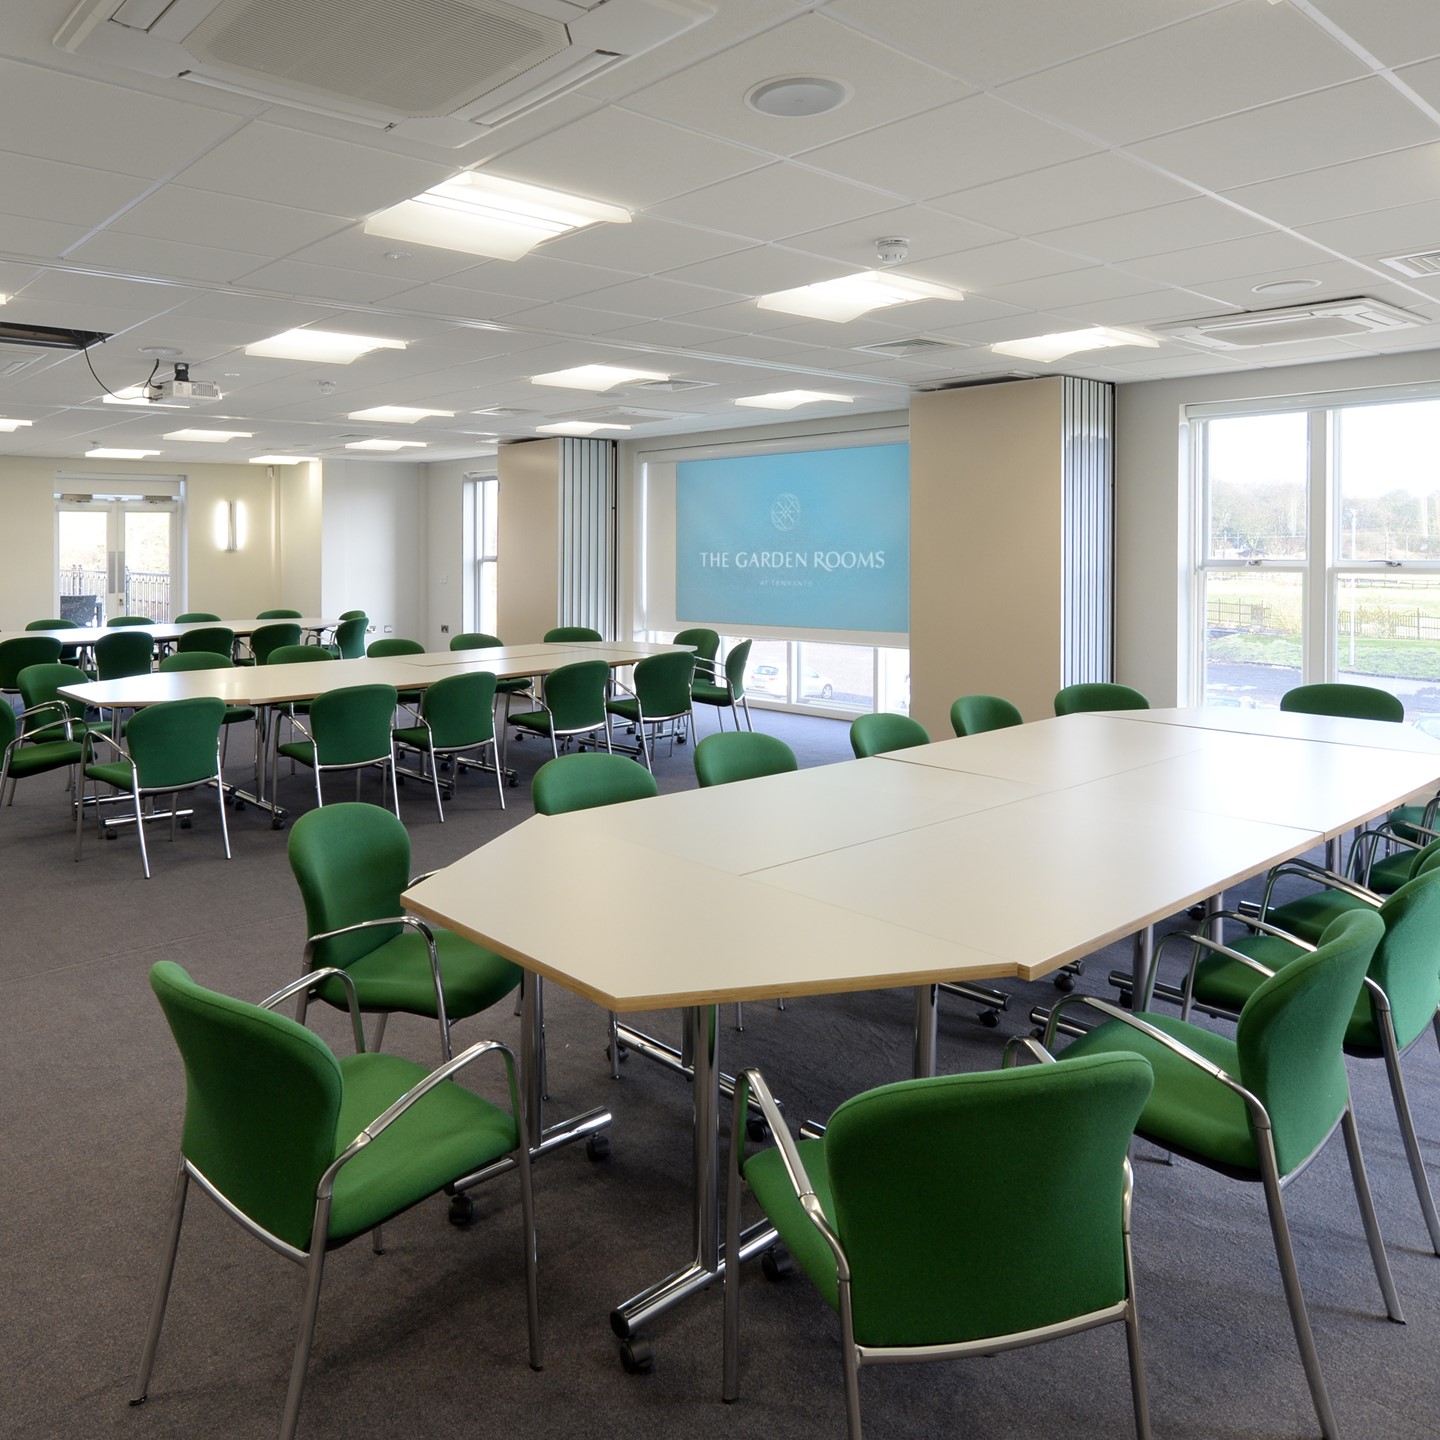 Seminar rooms fully open and projector screen